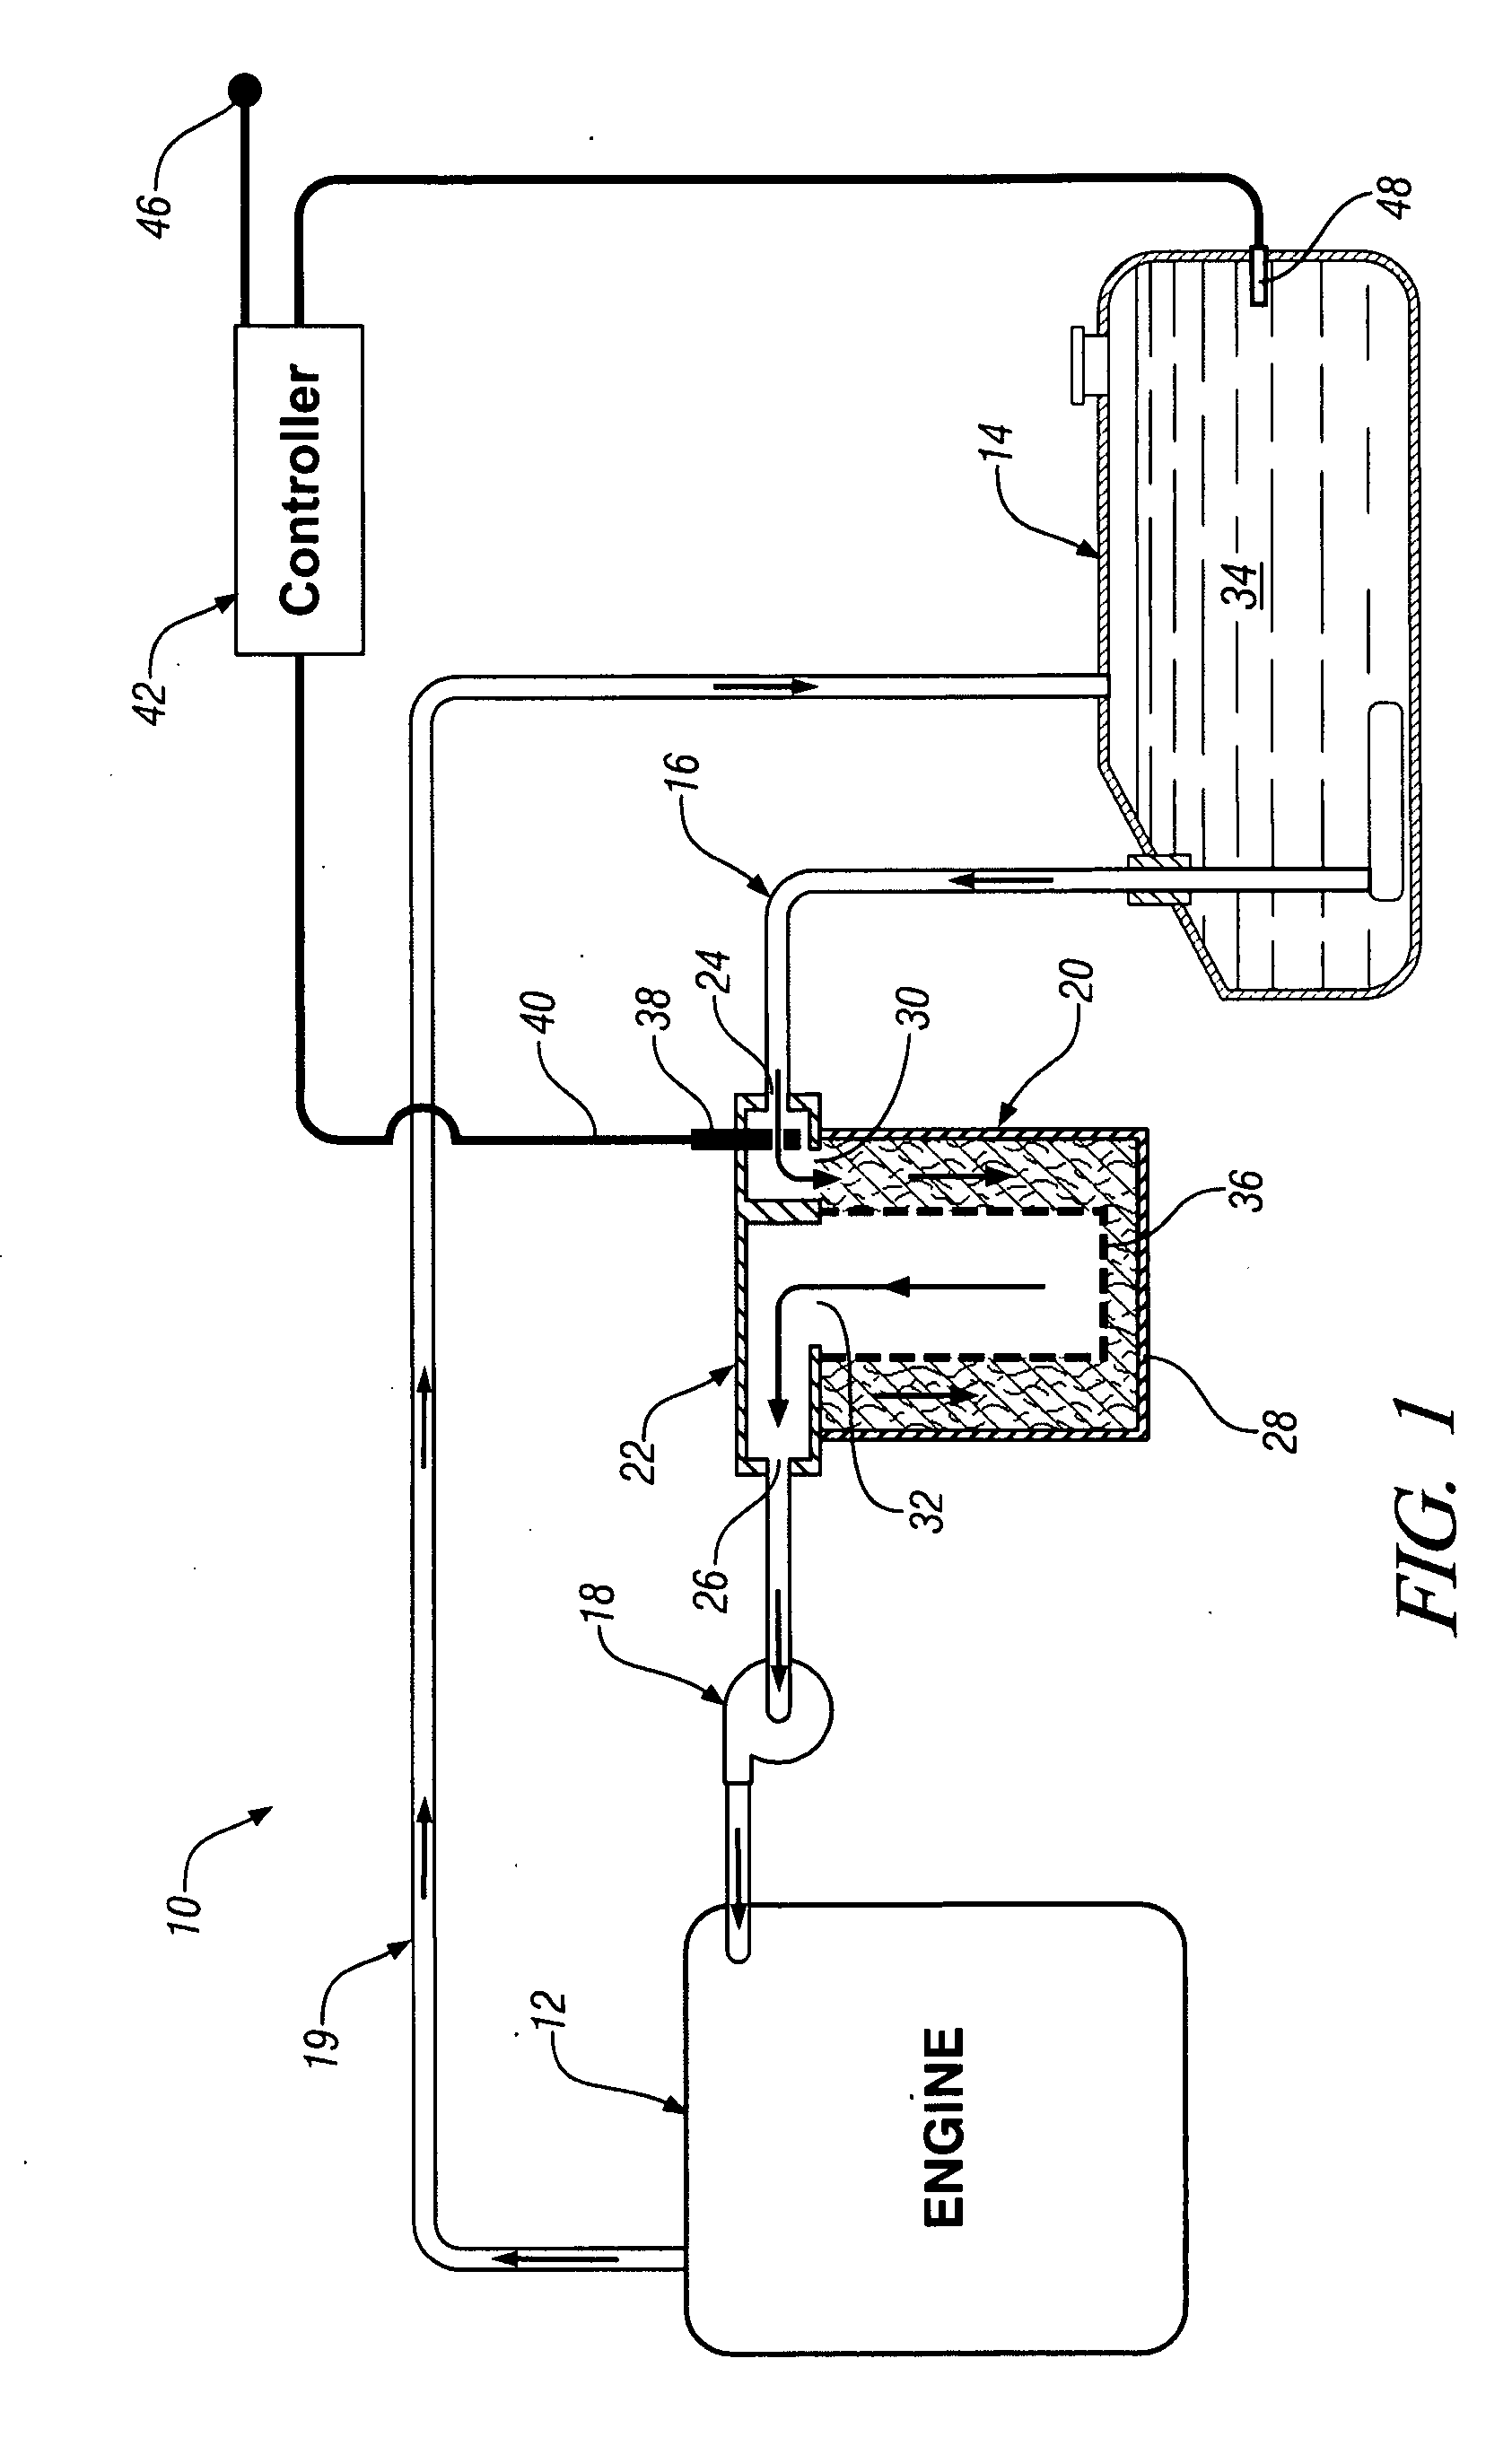 Apparatus For Reducing Fuel Waxing